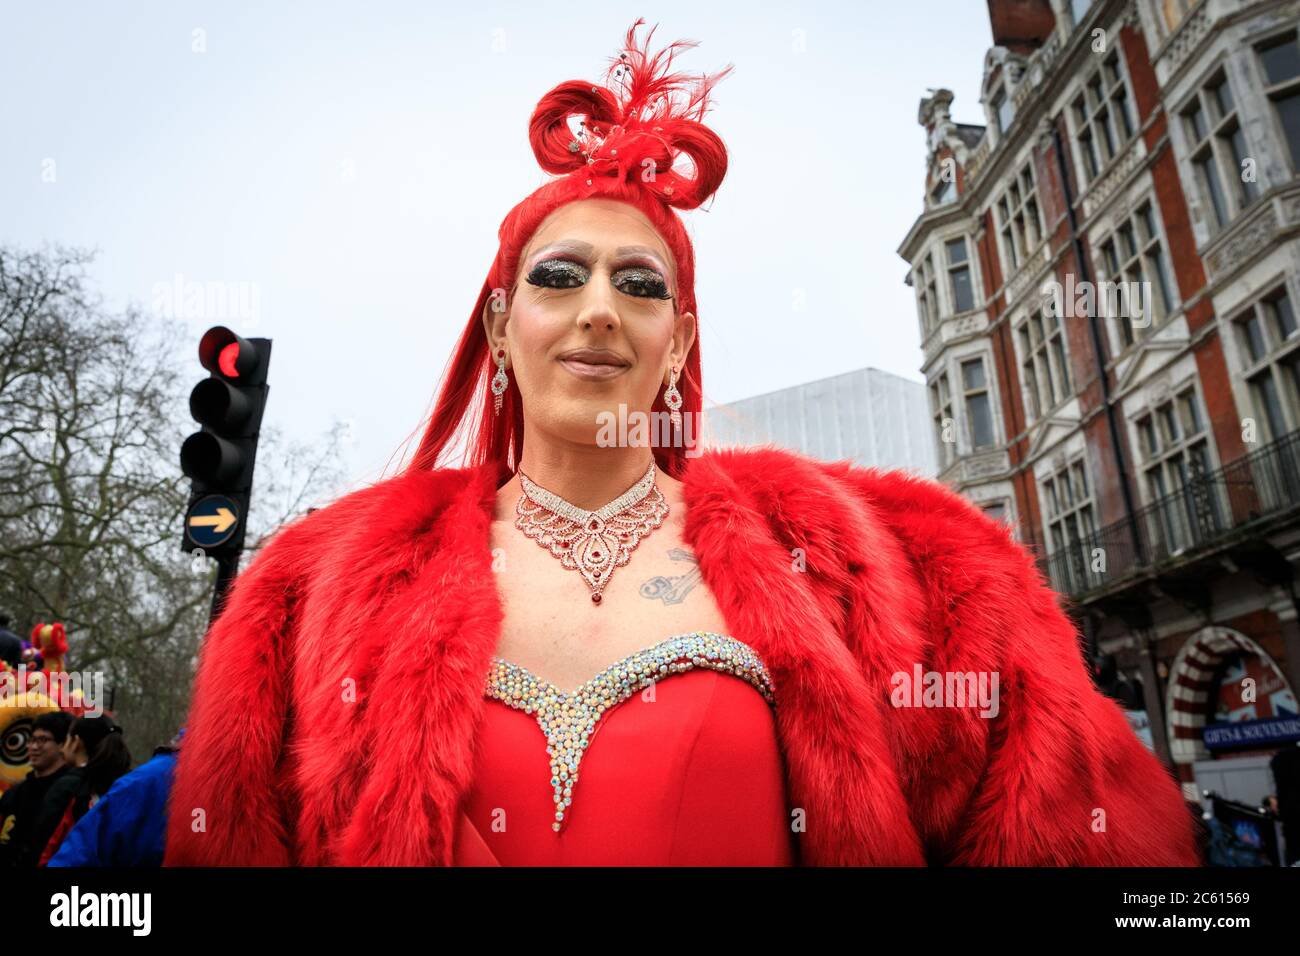 A striking, colourful Priscilla performer in red wig and outfit takes part in London New Year's Day Parade (LNYDP) 2020, London, England Stock Photo